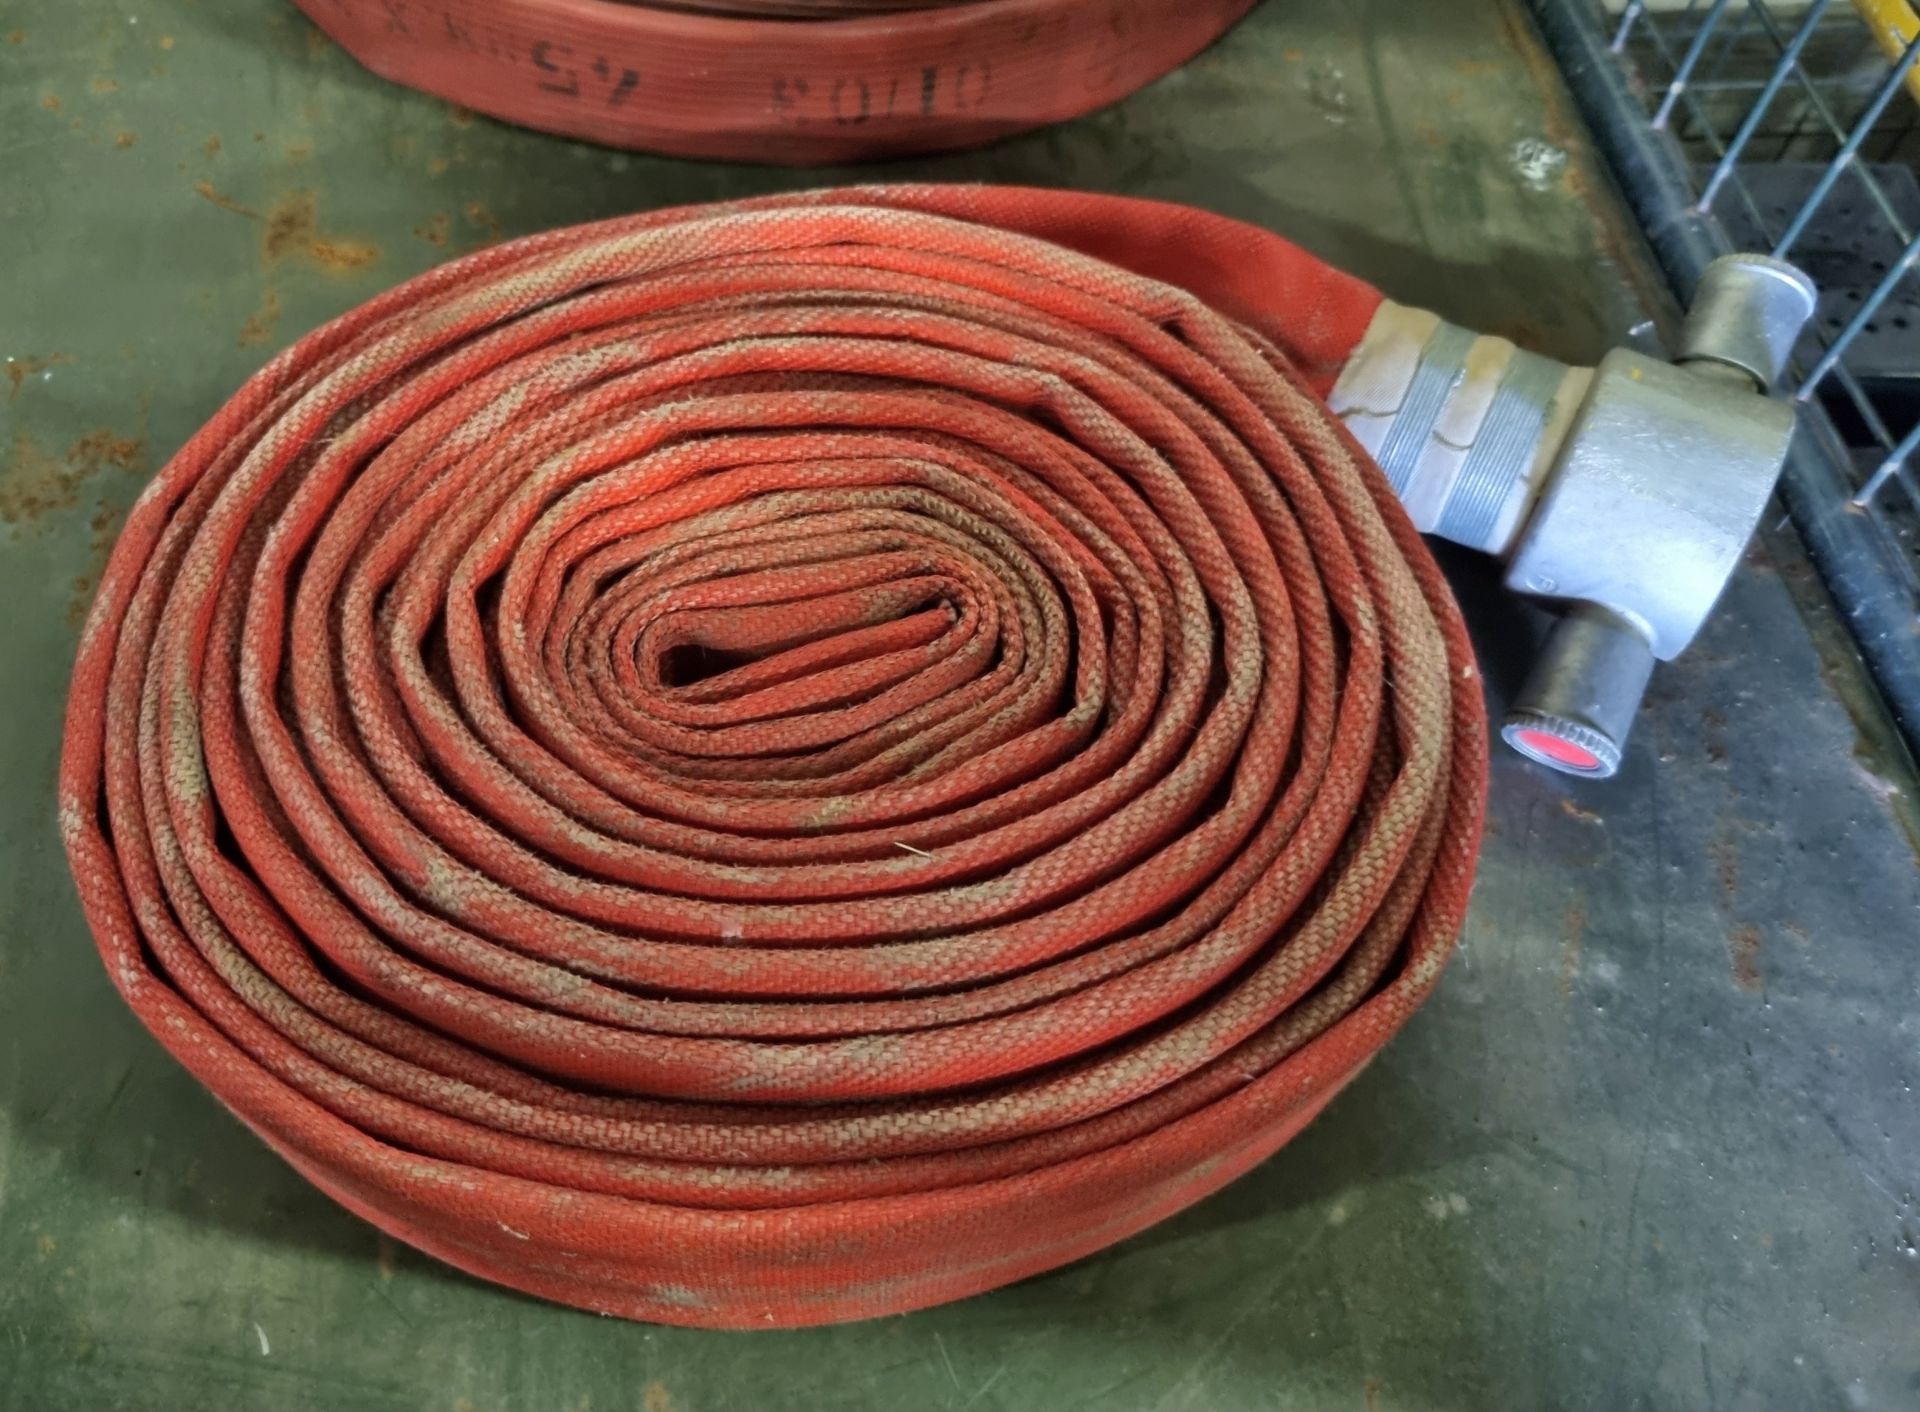 2x Angus Duraline 45mm lay flat hoses with couplings - approx 23m in length, Red lay flat hose - Image 3 of 4